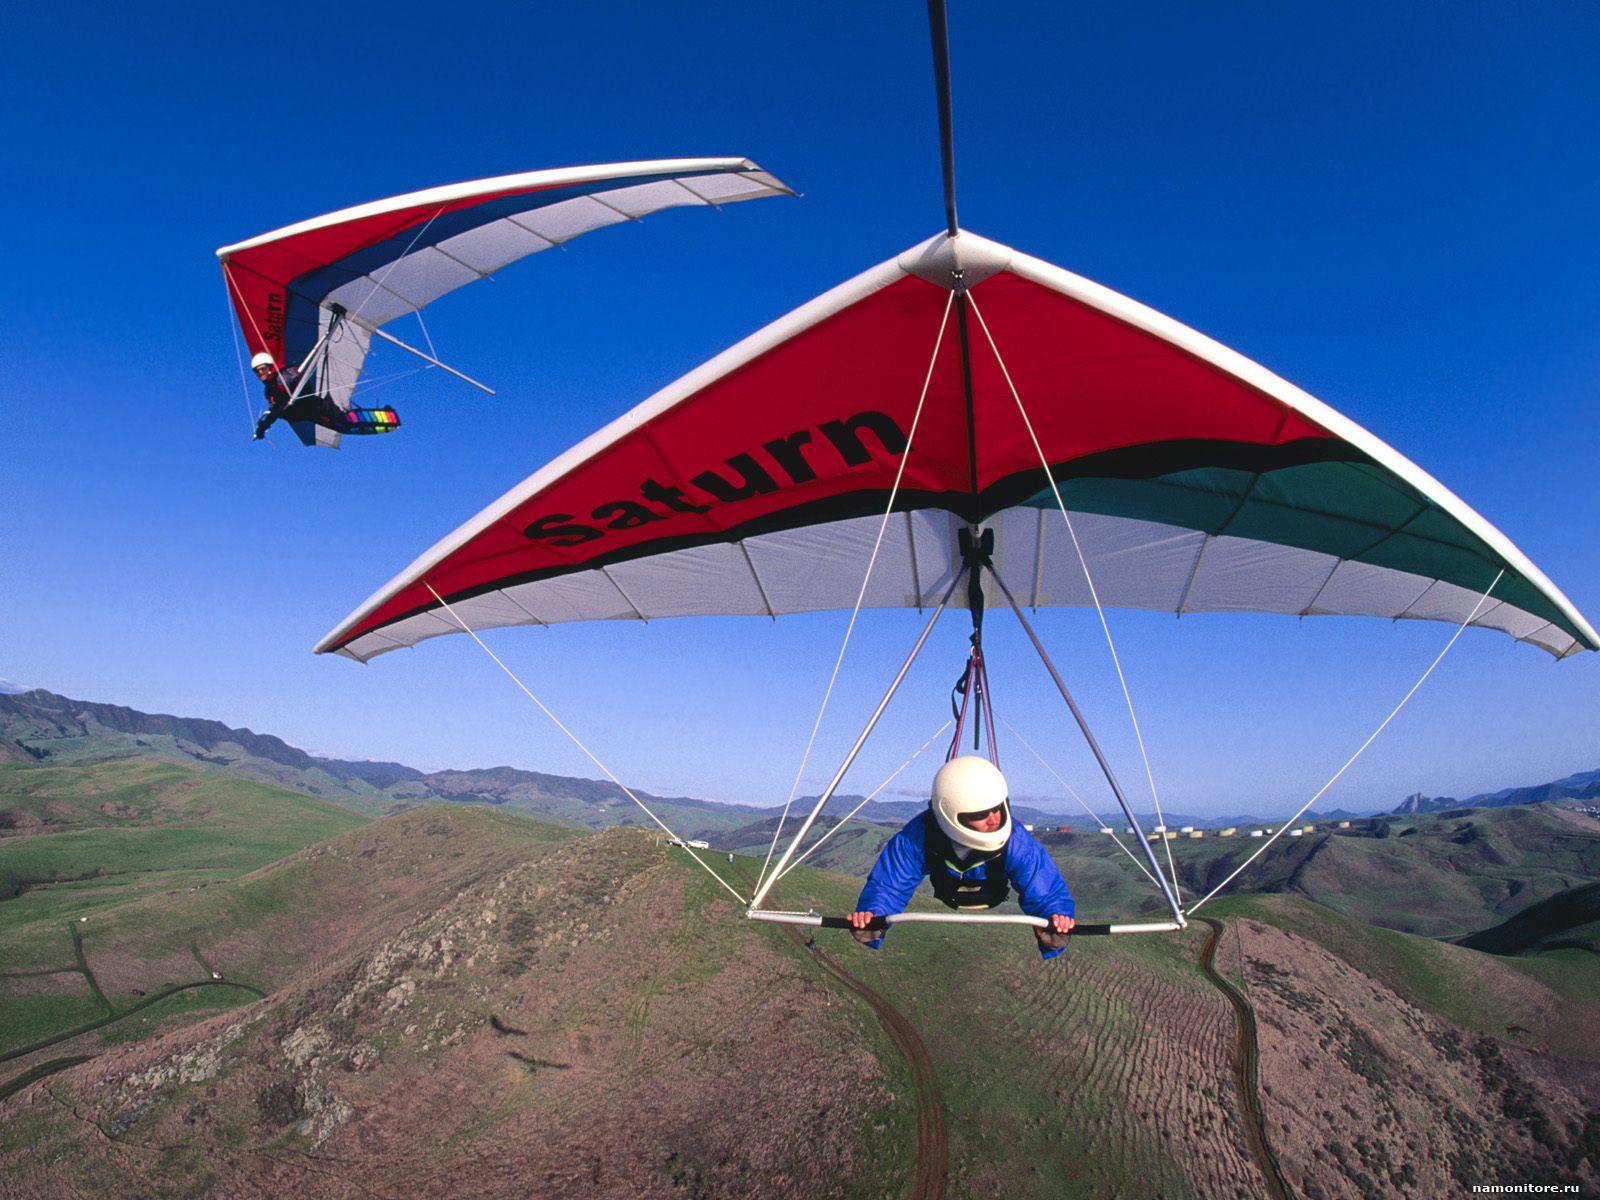 Two Hang Gliders Glider Sports